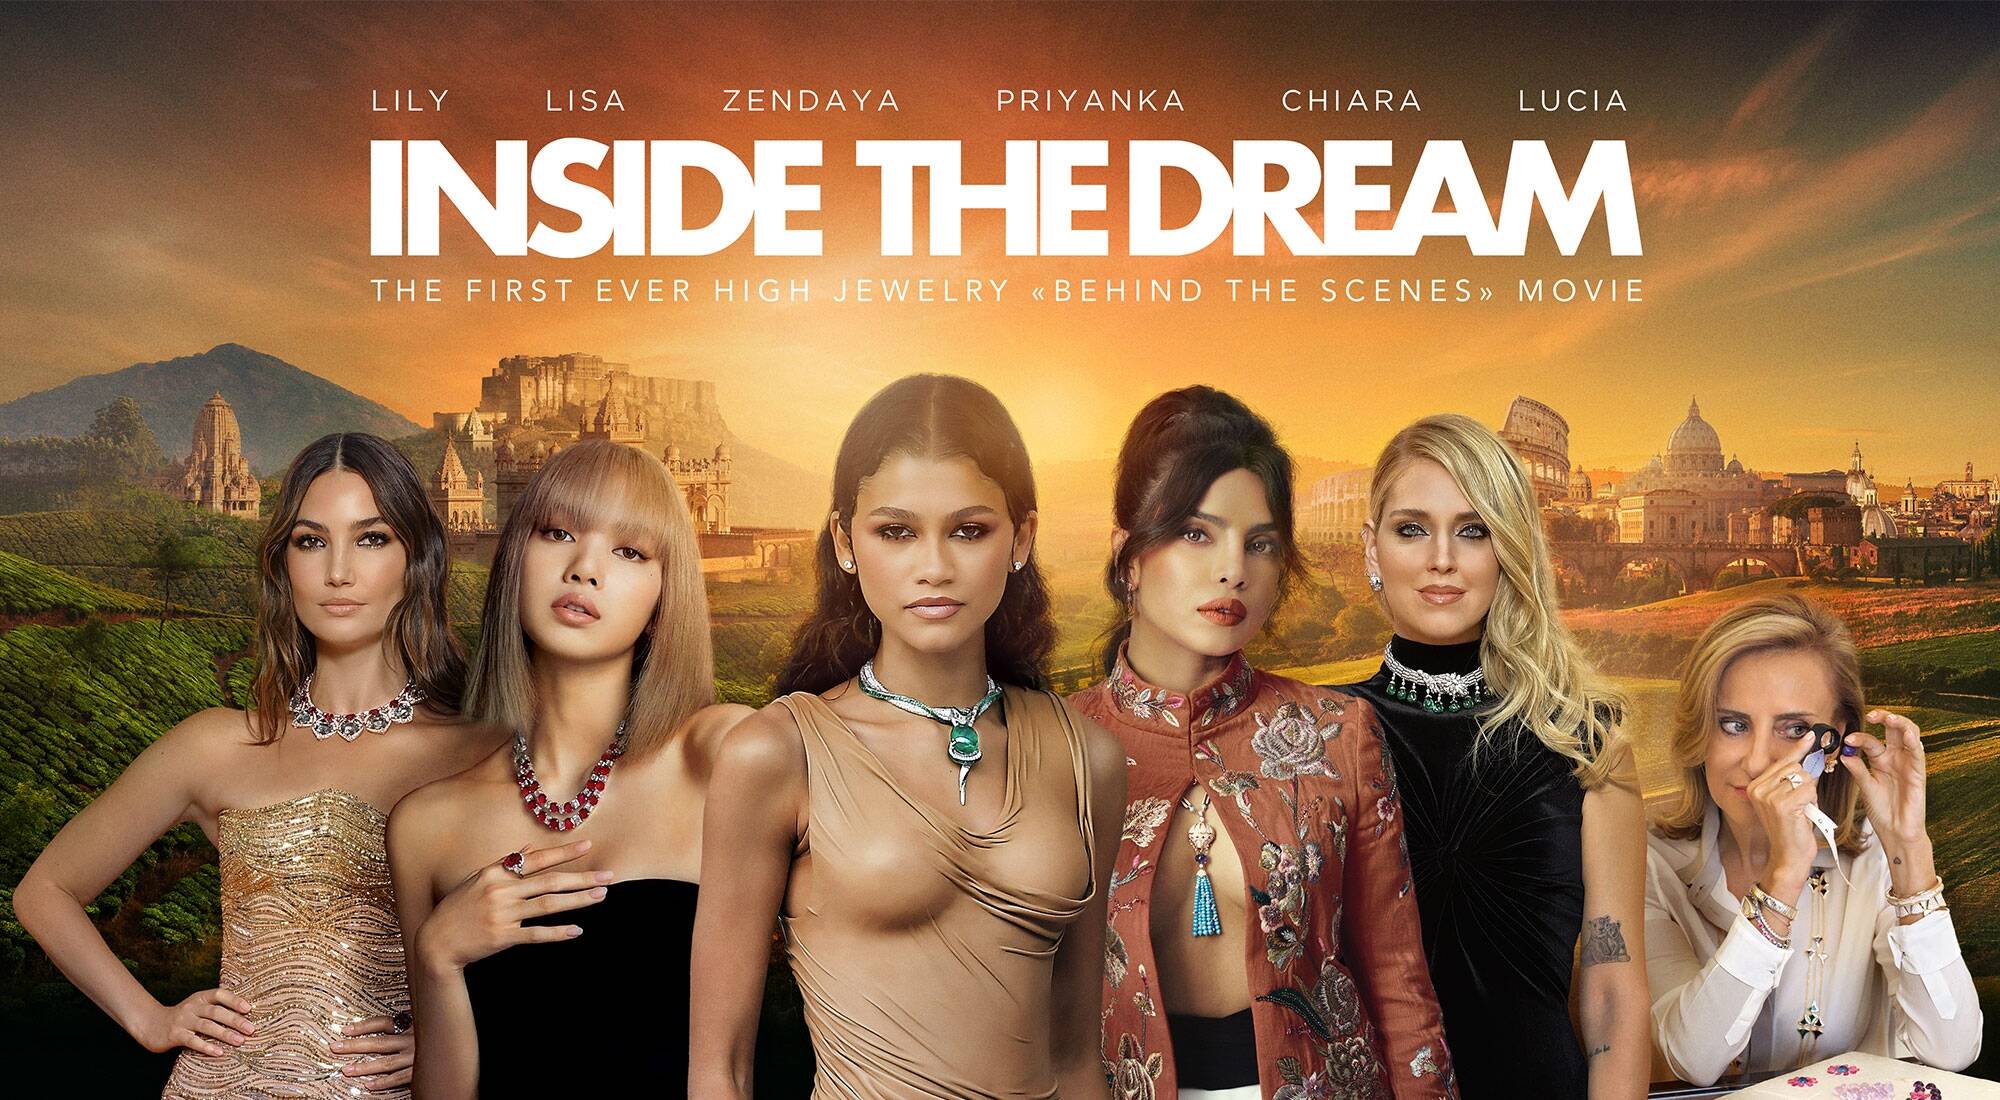 Inside the Dream”, a behind-the-scenes journey to the heart of